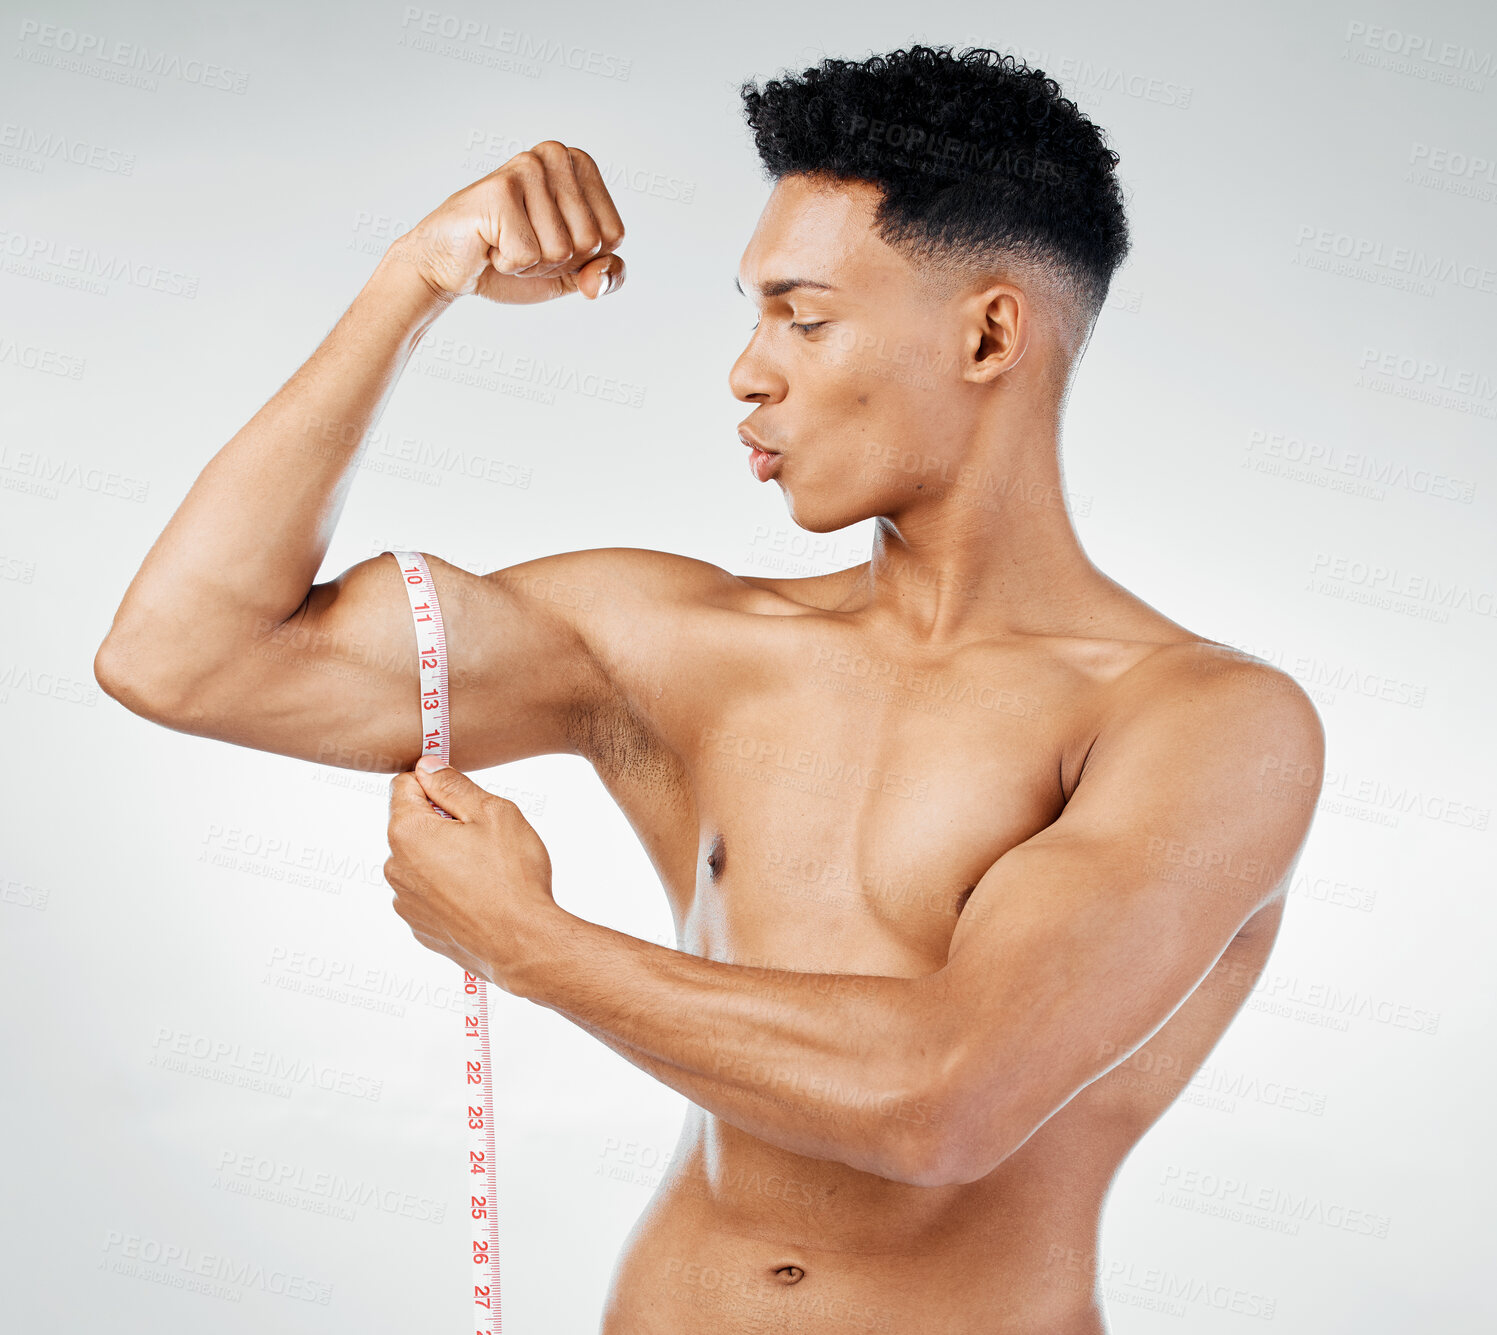 Buy stock photo Fitness, biceps and man with measuring tape on arm, check muscle growth and development in training exercise. Workout, gym and happy healthy bodybuilder measuring bicep muscles, health and wellness.